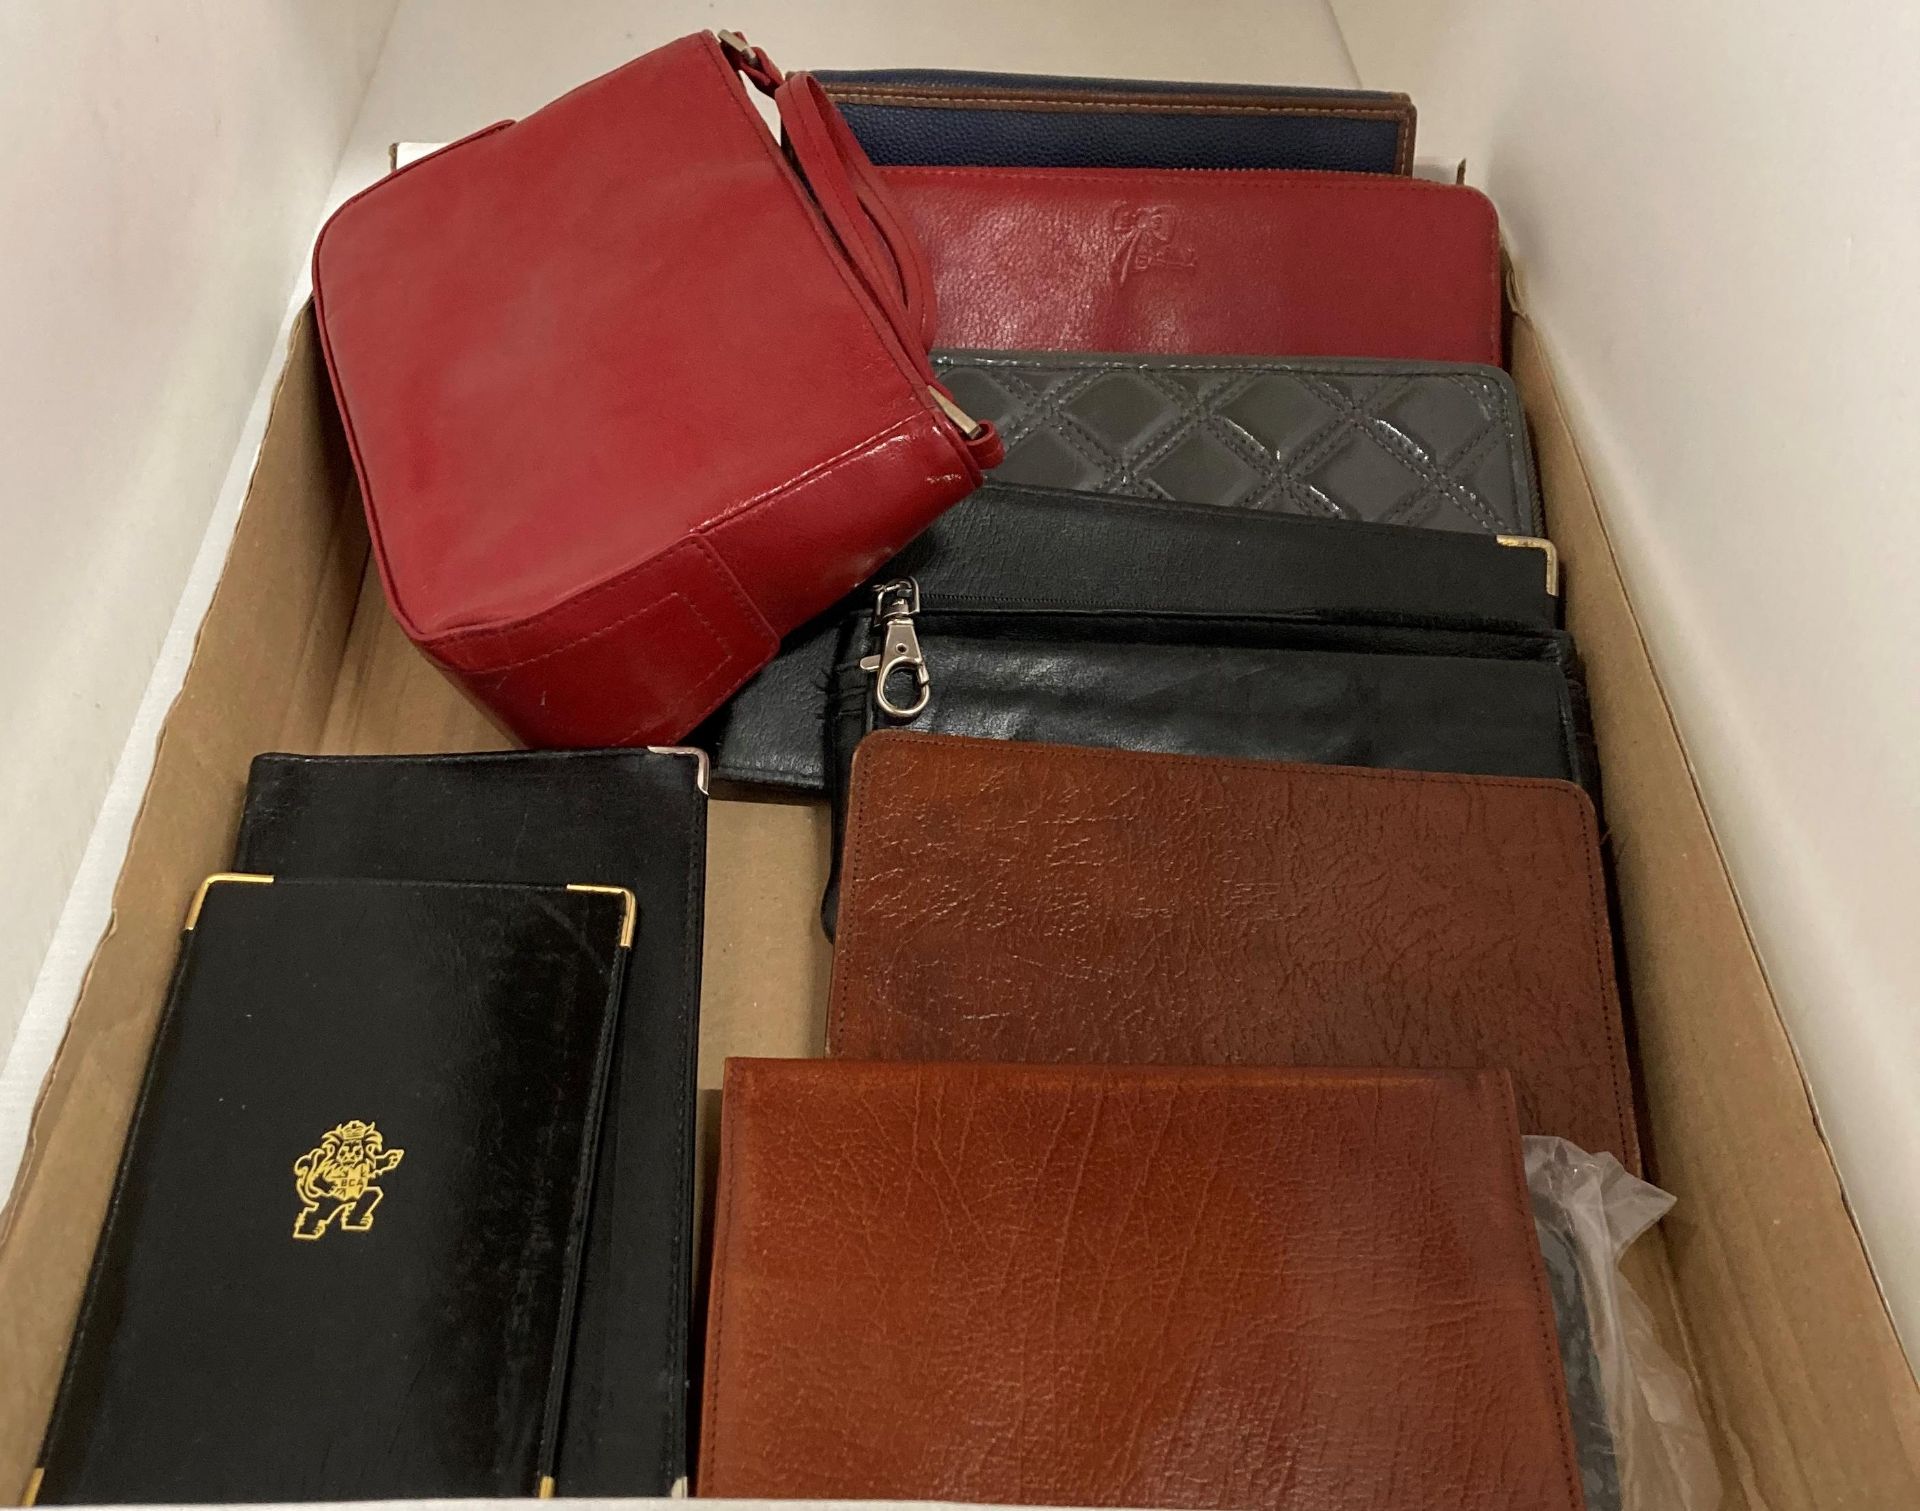 Contents to tray - red handbag and assorted purses, leather pocketbooks, etc.